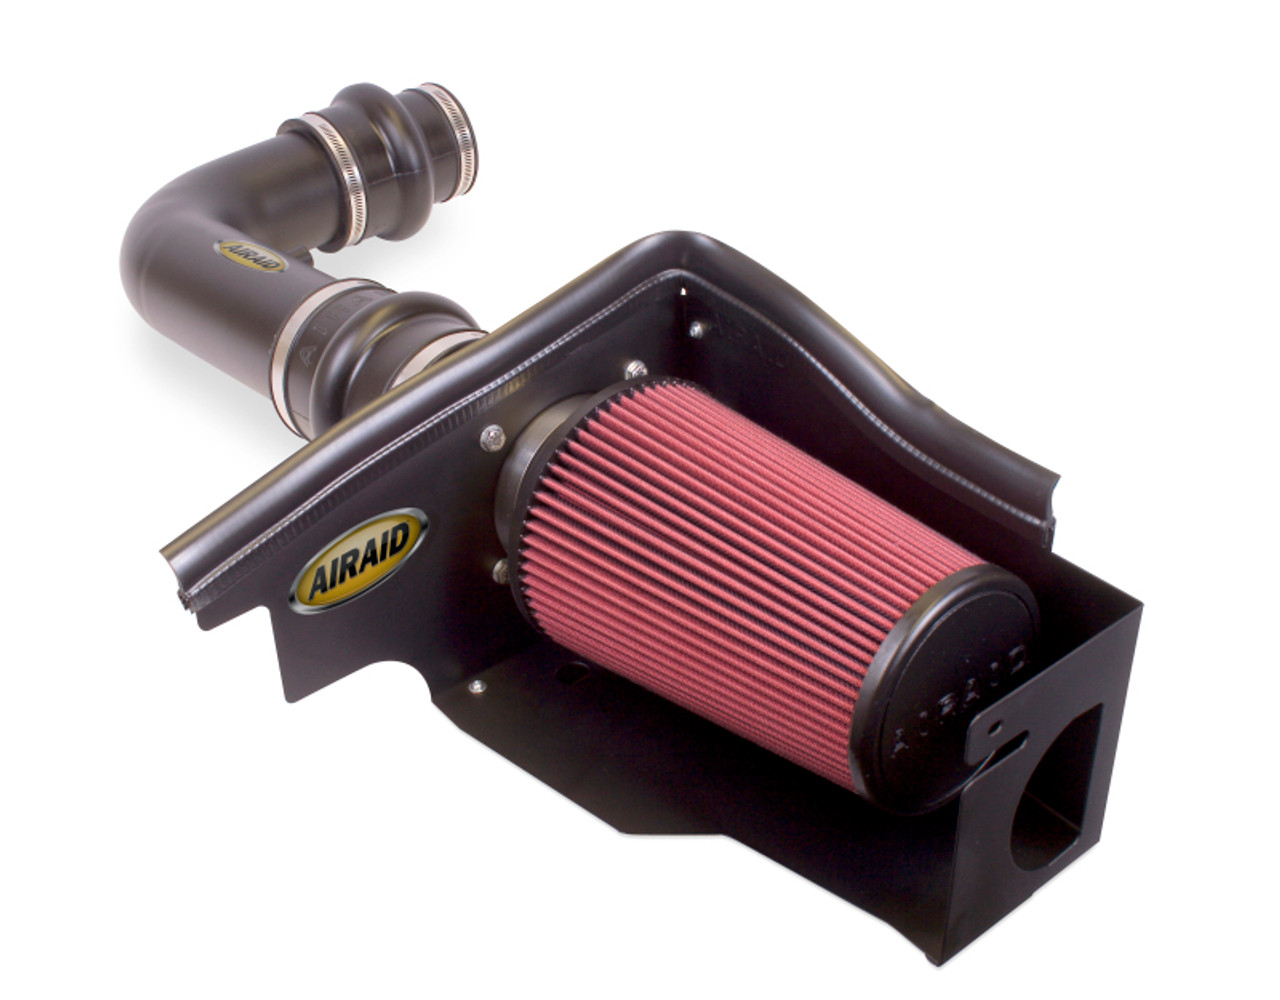 AIRAID Cold Air Intake System by K＆N: Increased Horsepower, Dry Synthetic Filter: Compatible with 1997-2003 FORD (F150) AIR-401-115 - 1